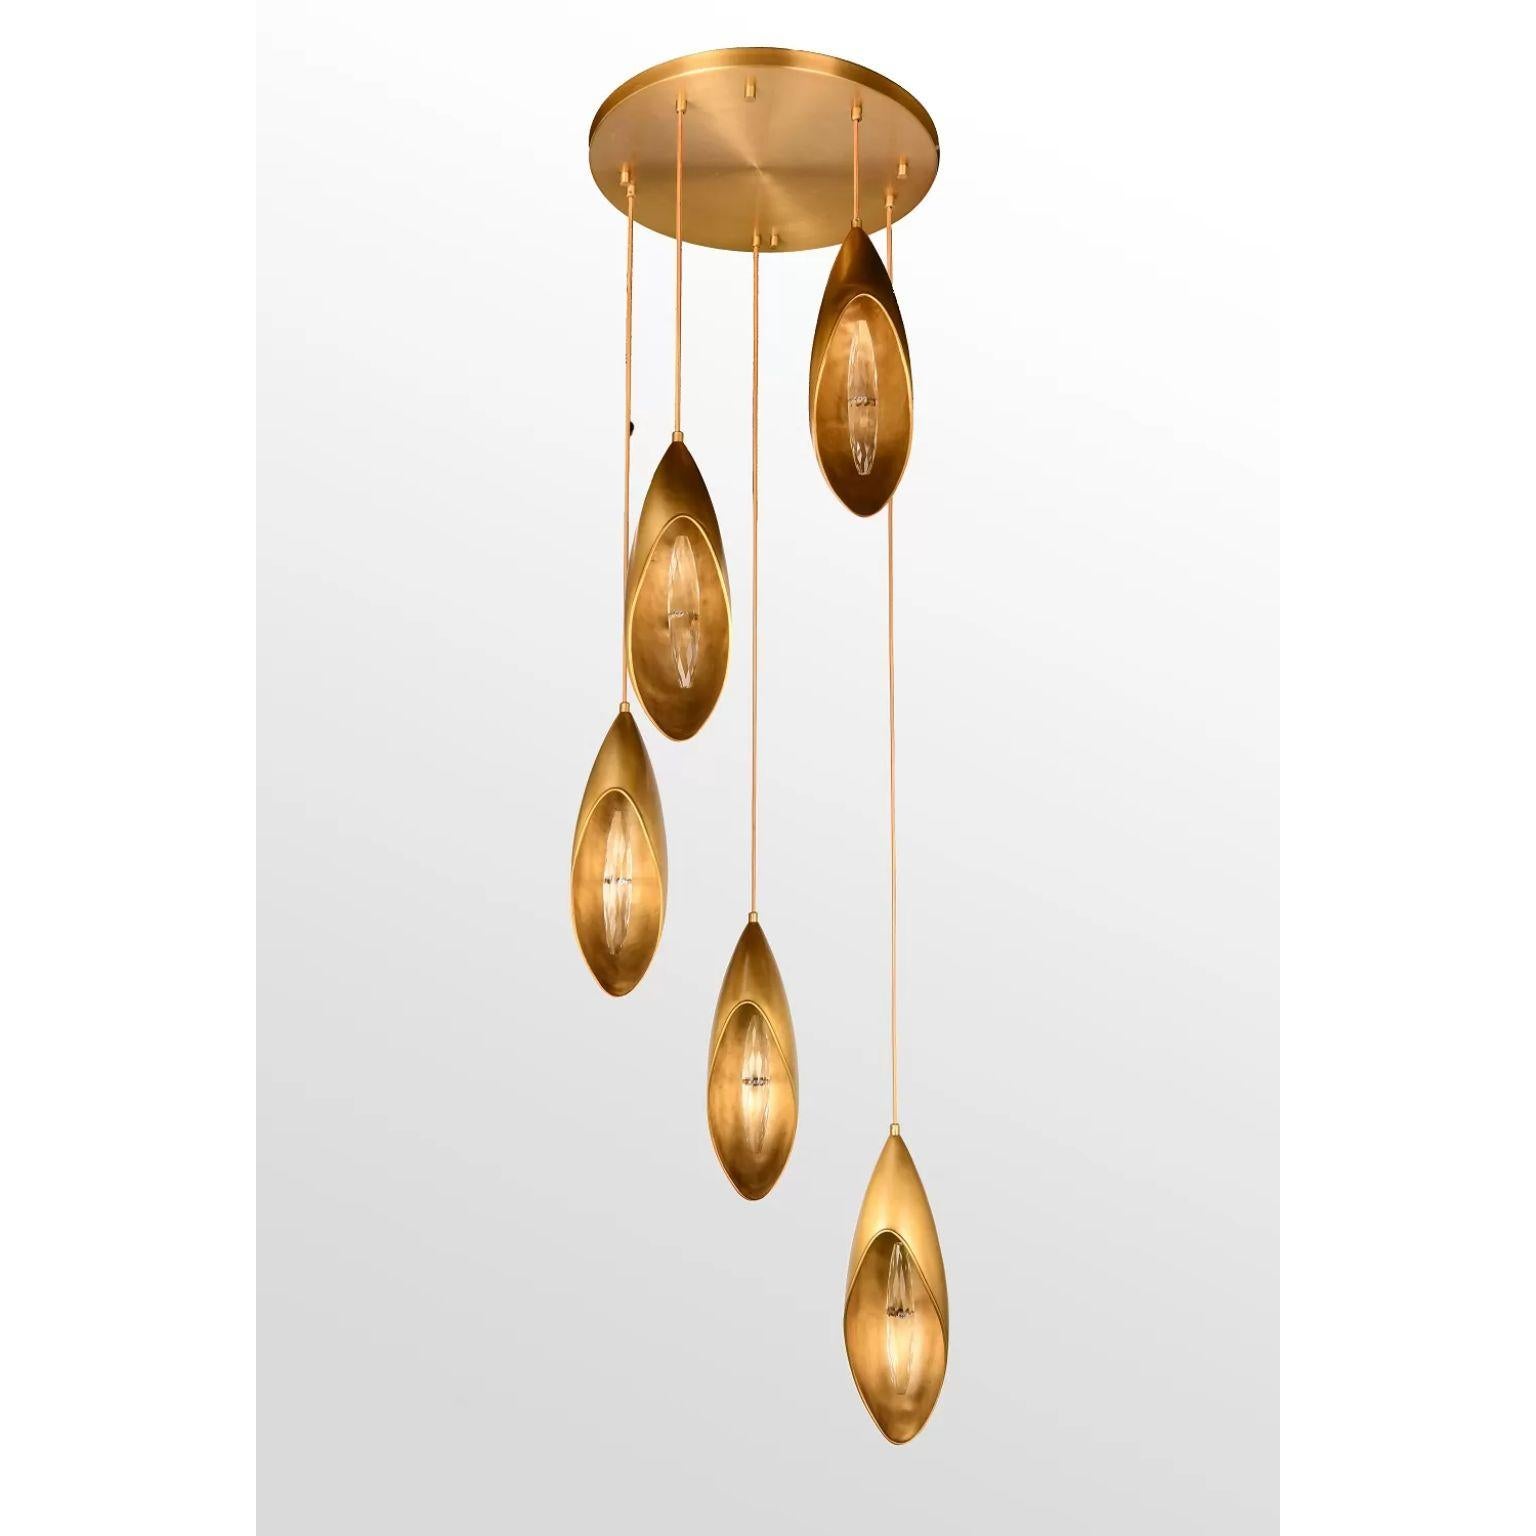 Lilly Chandelier by Dainte
Dimensions: Ø 50 x H 175 cm.
Materials: Crystal and brass. 

Lily flowers symbolize purity and devotion. The collection illustrates minimalistic and elegant silhouettes with complementary colors. The entire body is modeled